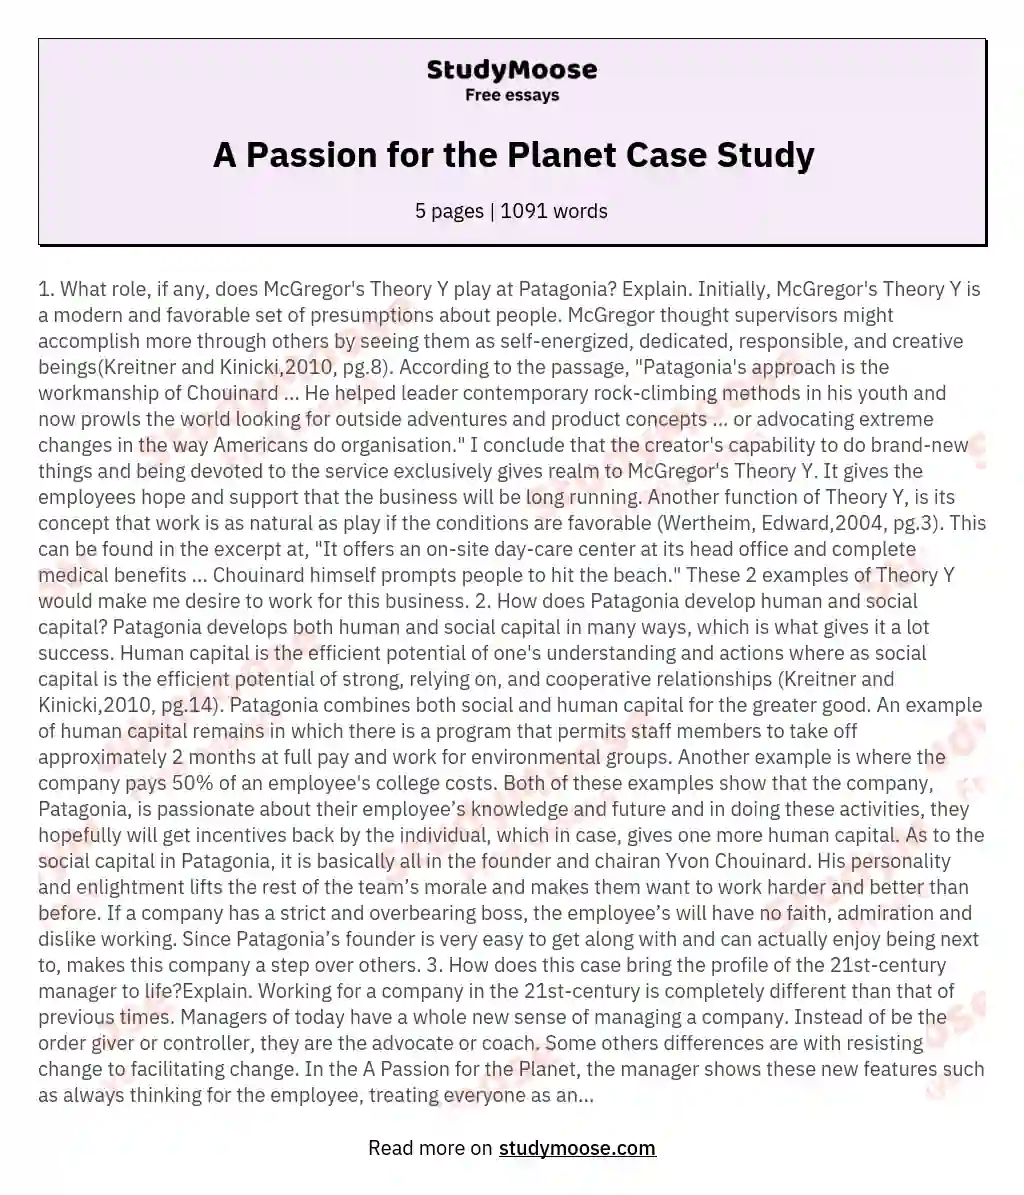 A Passion for the Planet Case Study